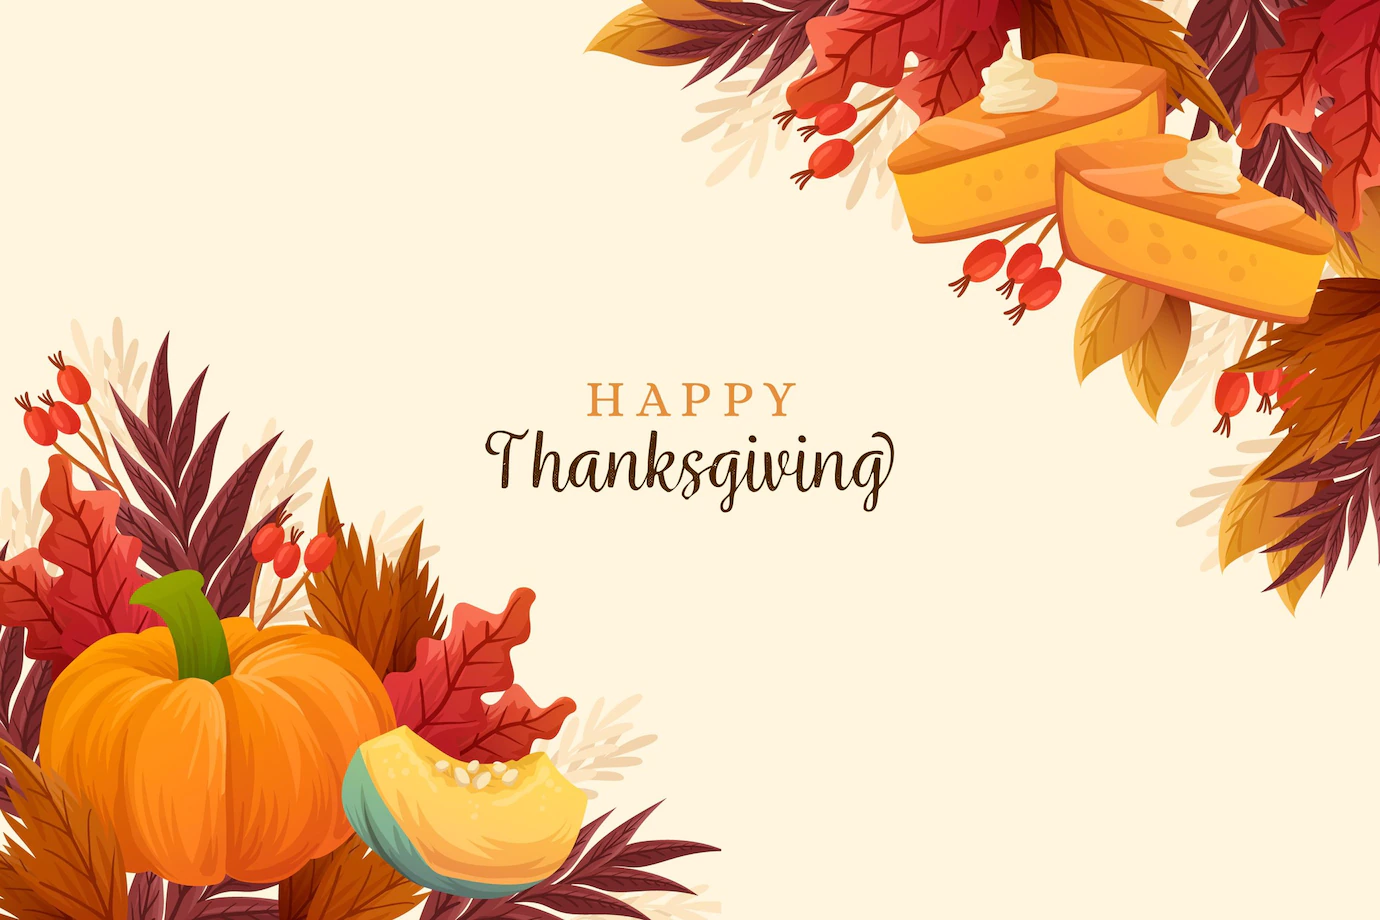 Hand Drawn Style Thanksgiving Background 52683 47423